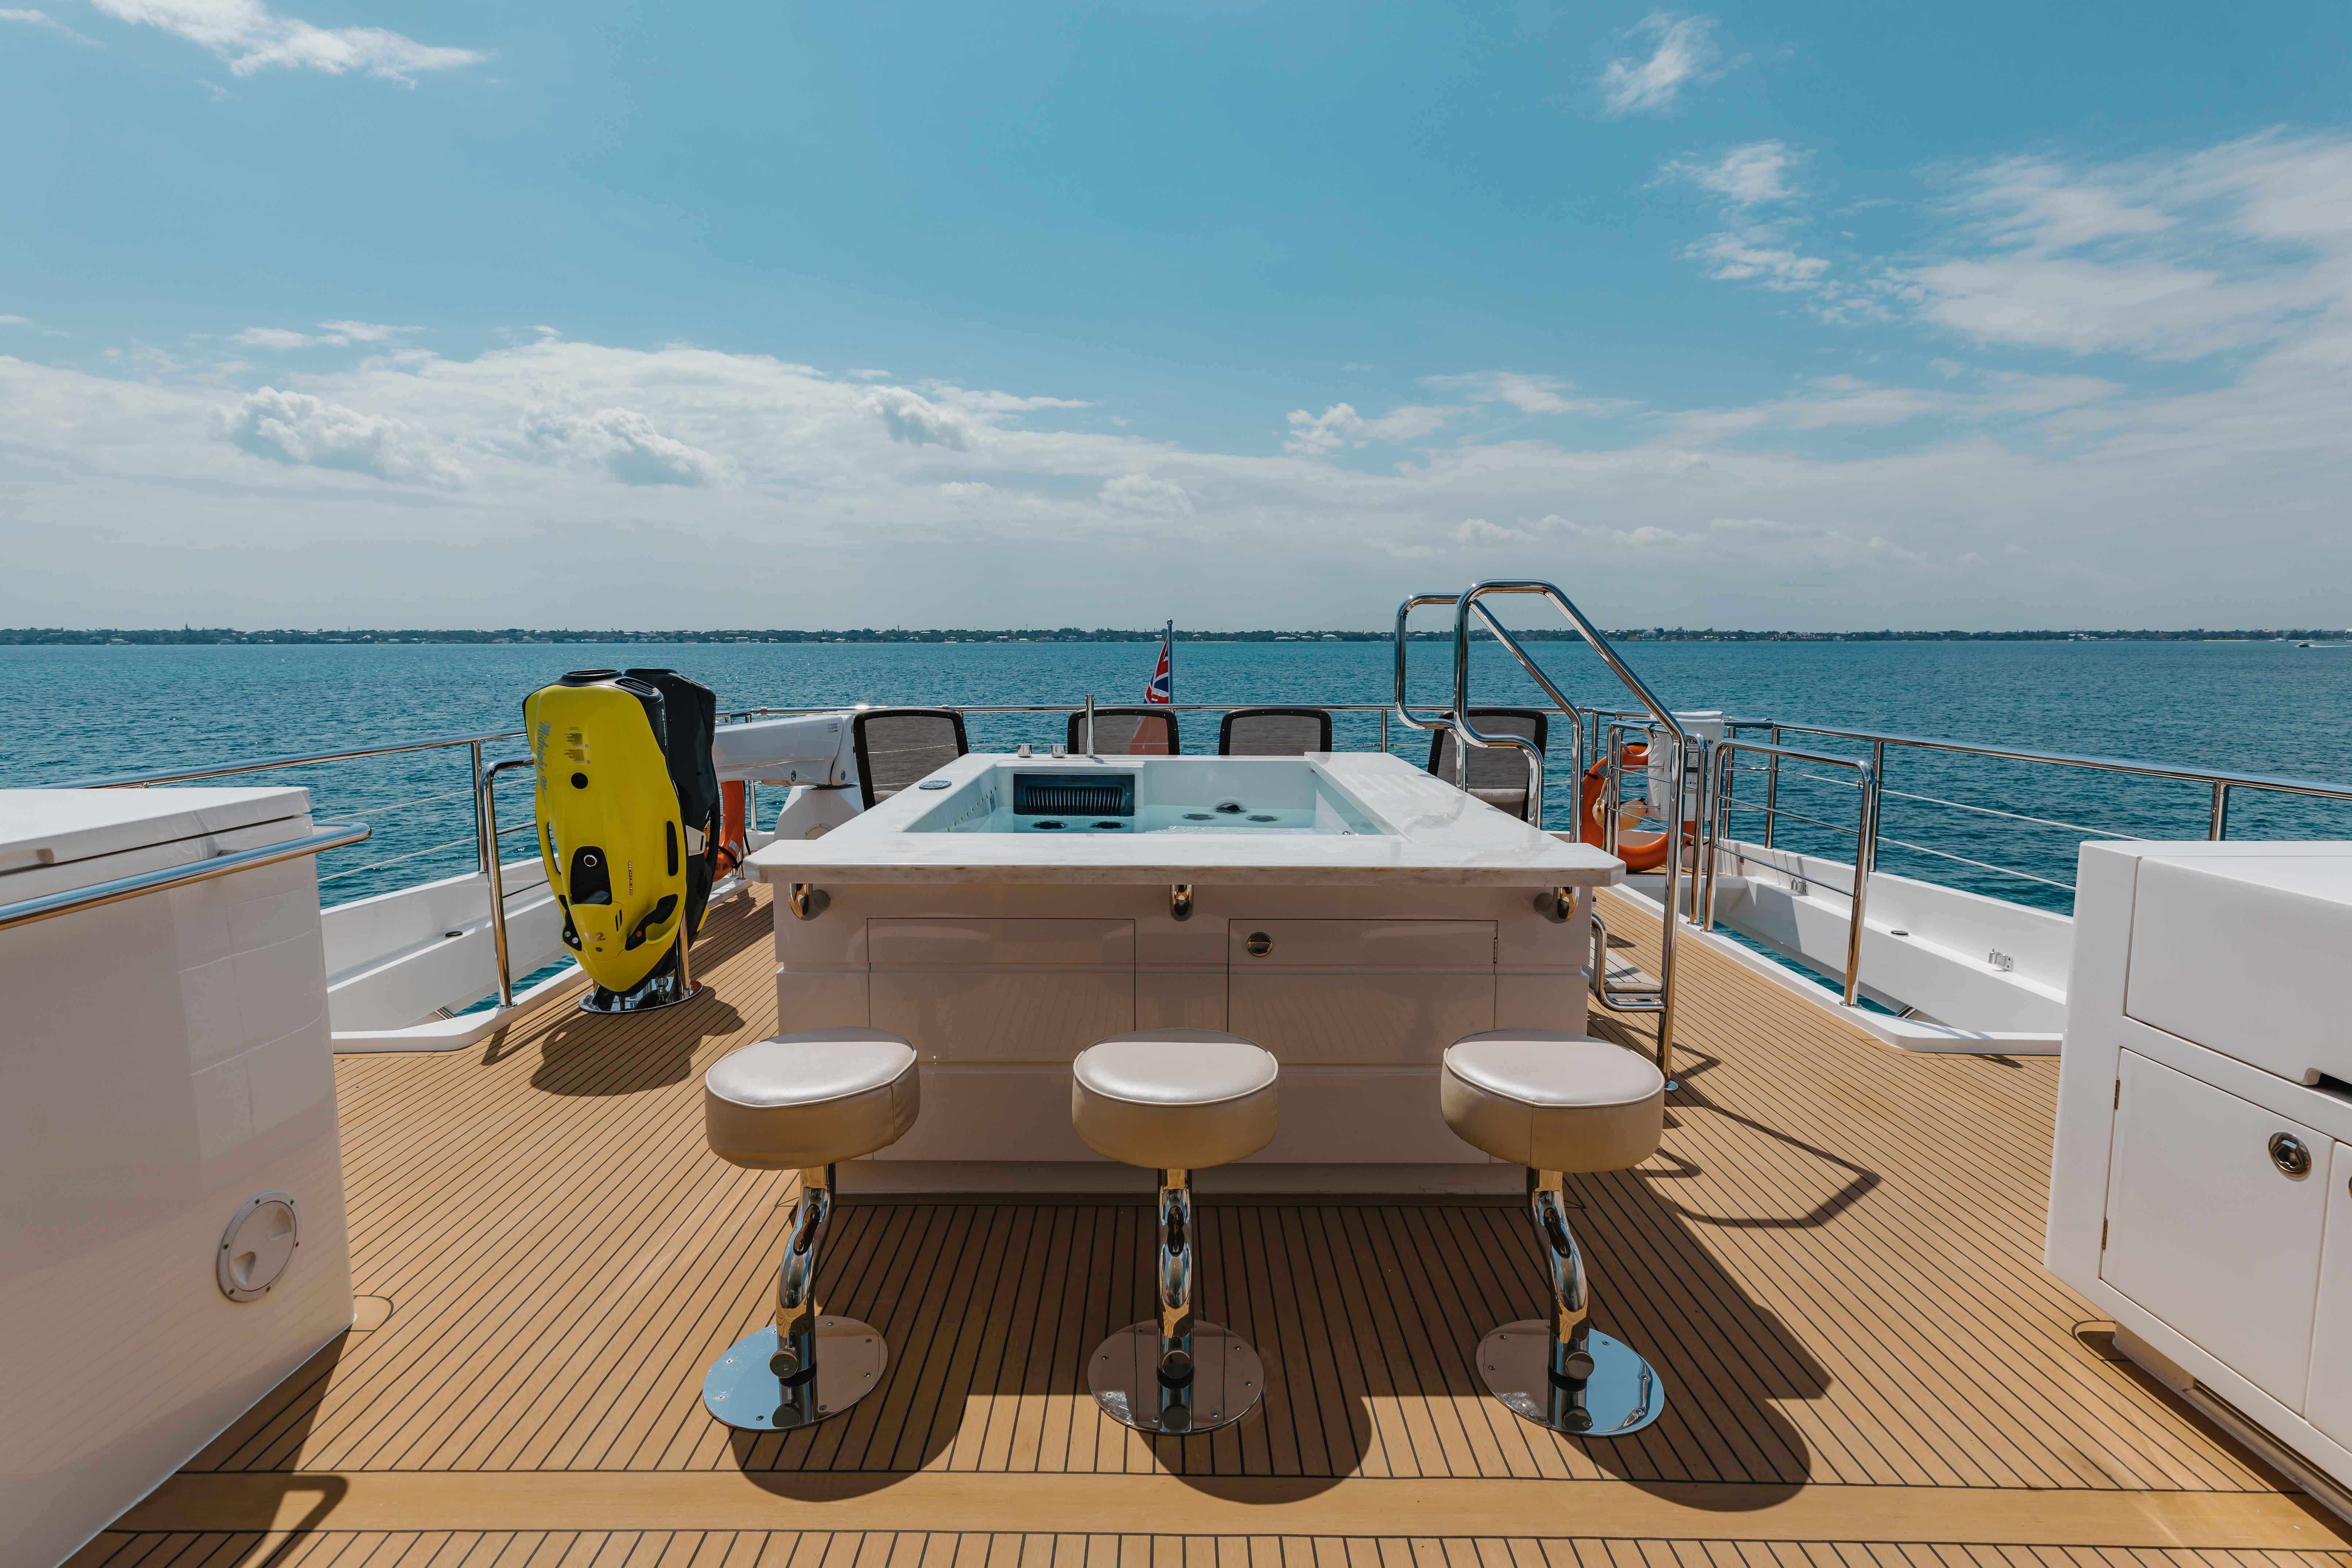 Hot Tub on Boat Deck and 3 Stools